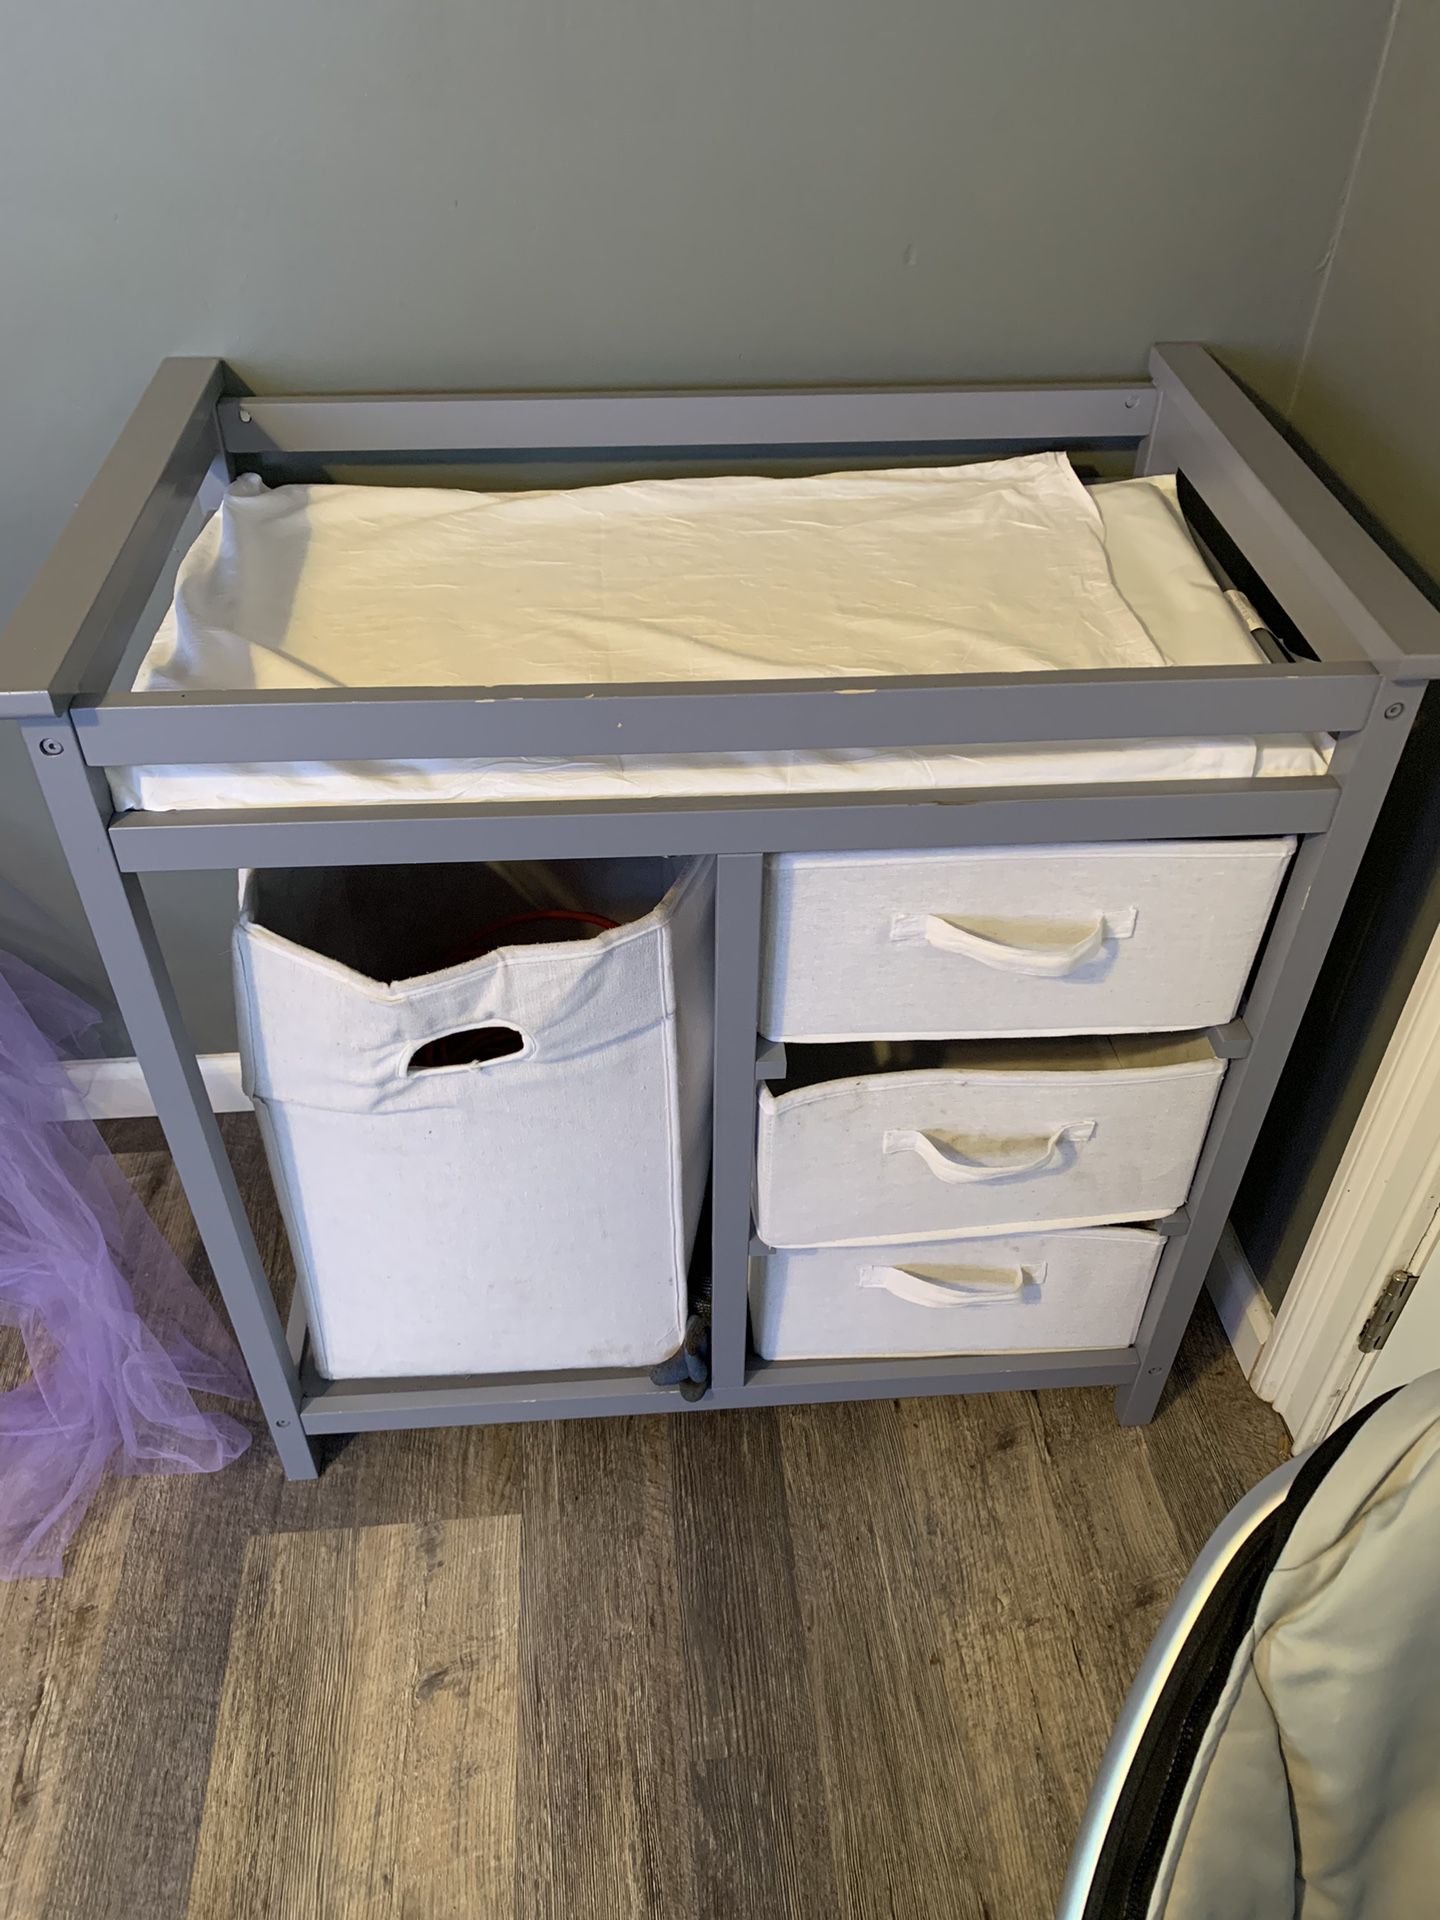 Baby Changing Table And 4Moms Rocker